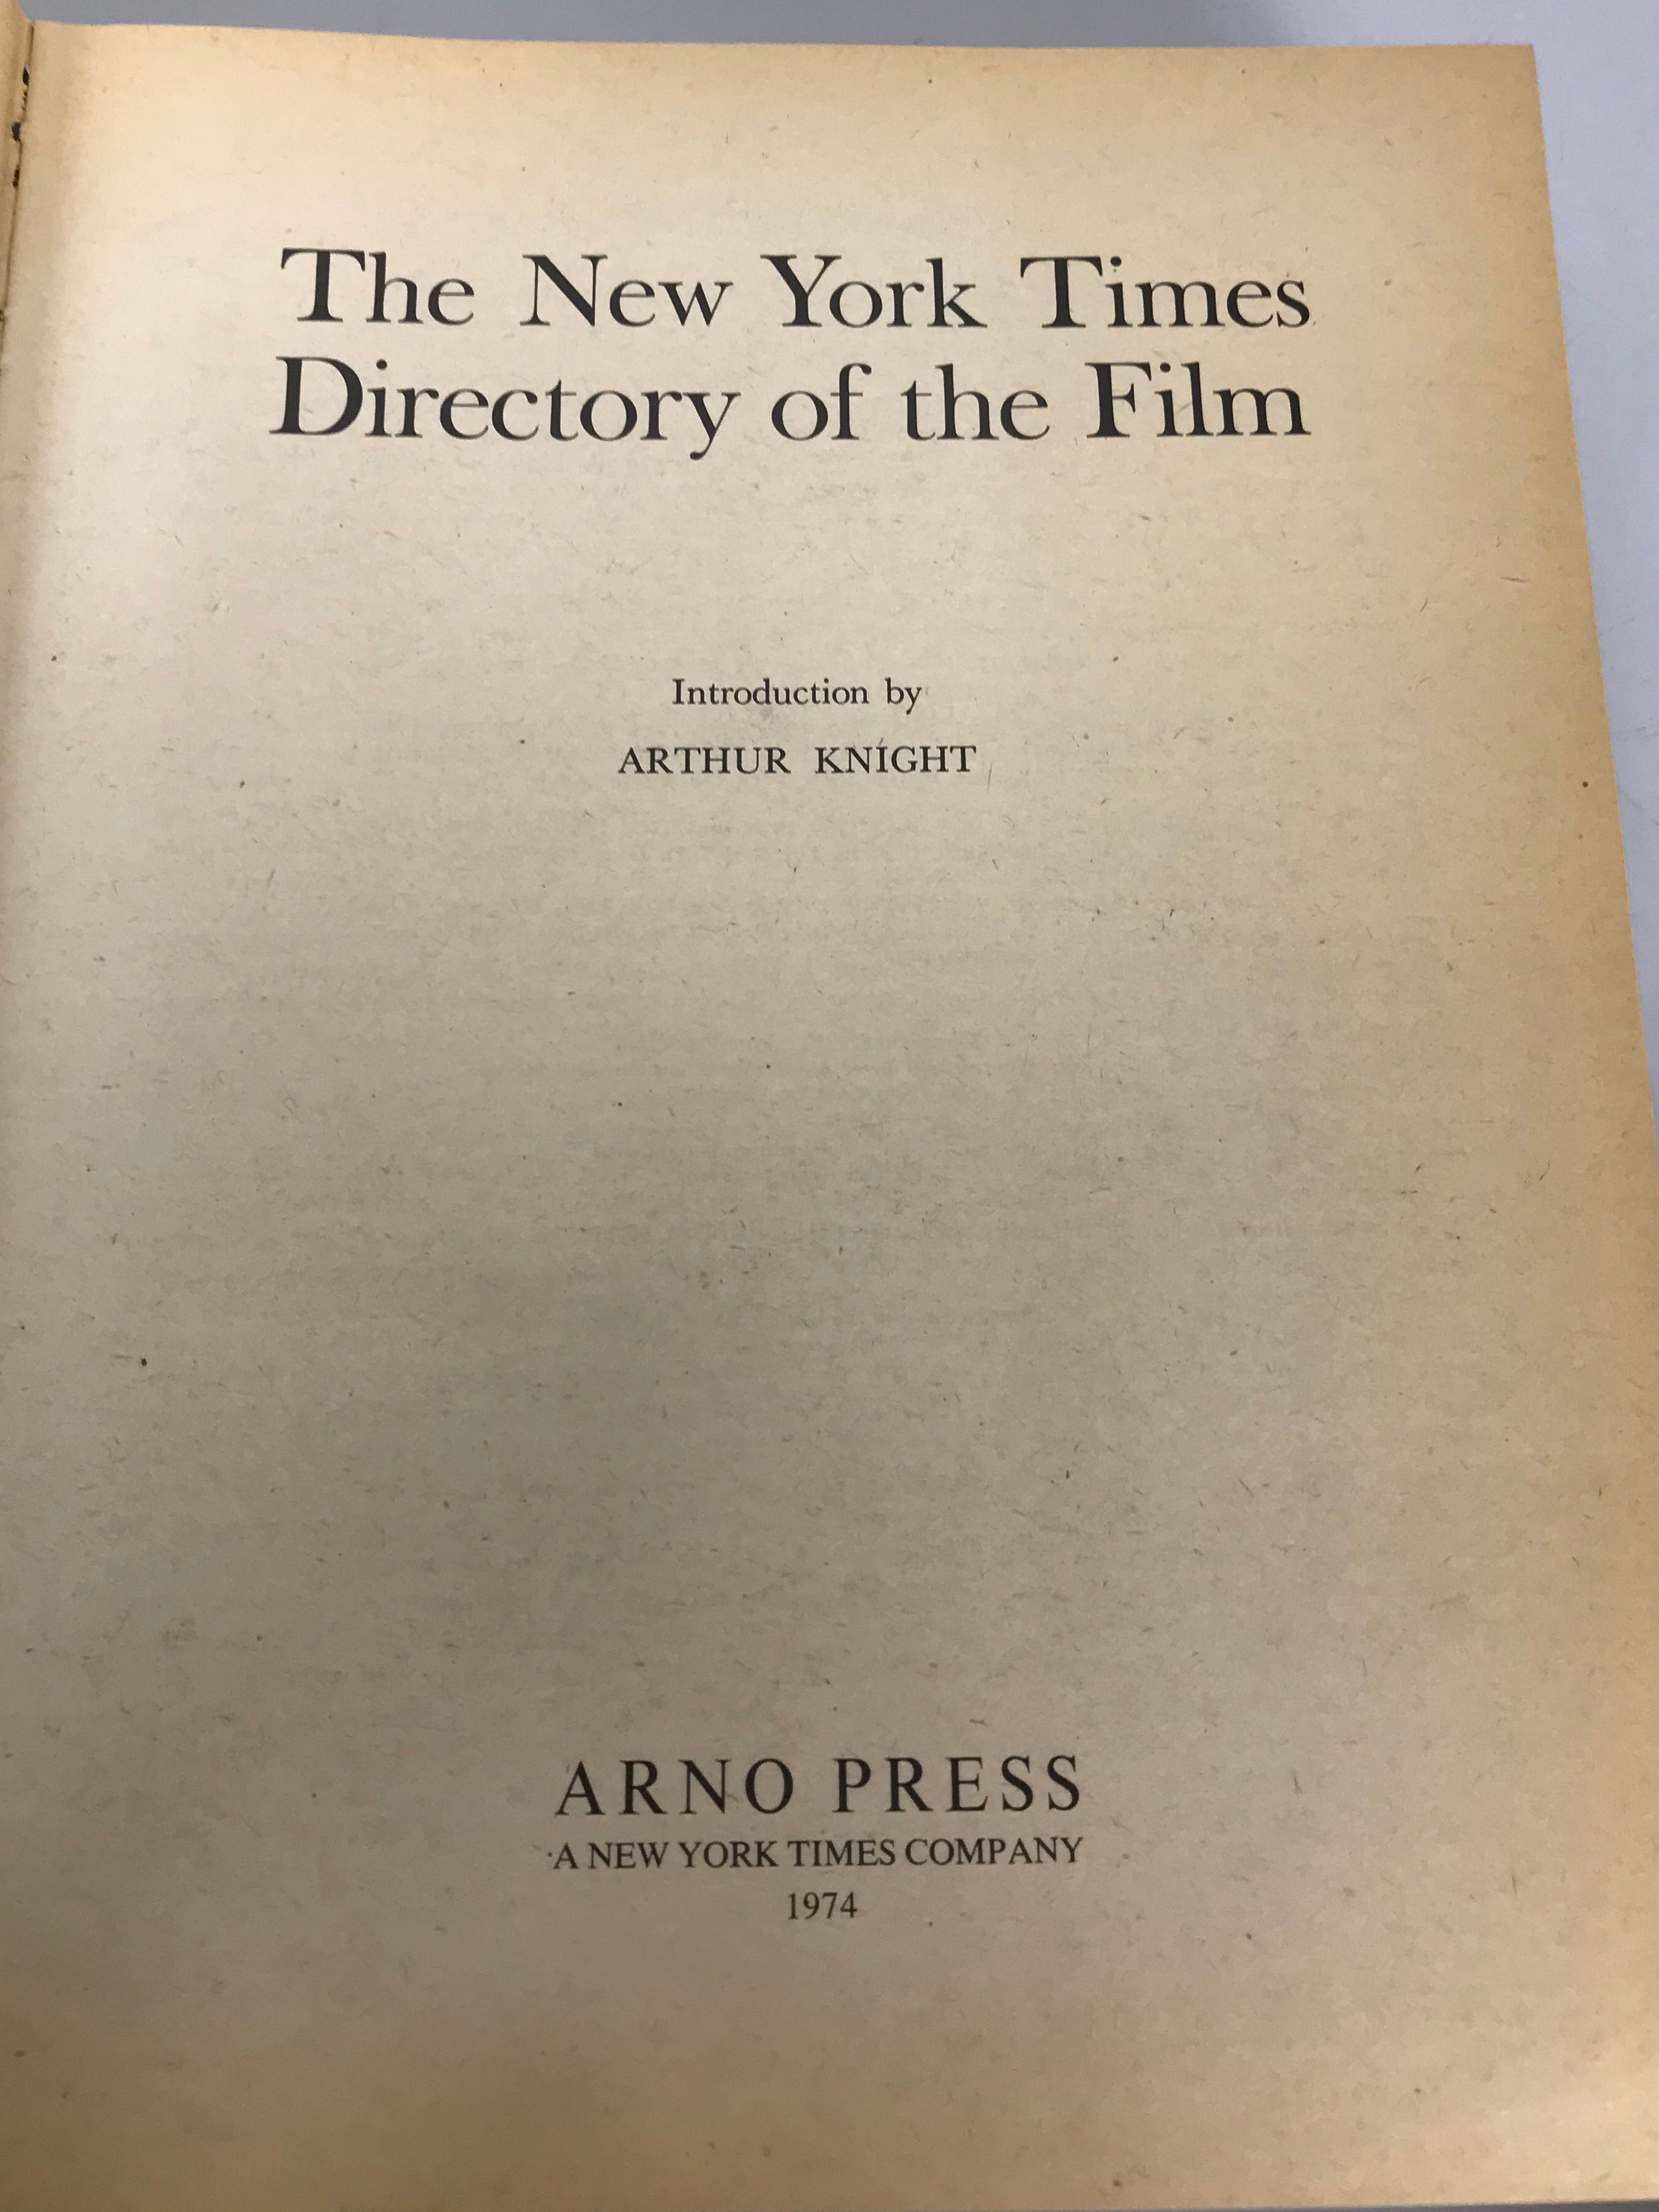 The New York Times Directory of Film Abridged Edition 1974